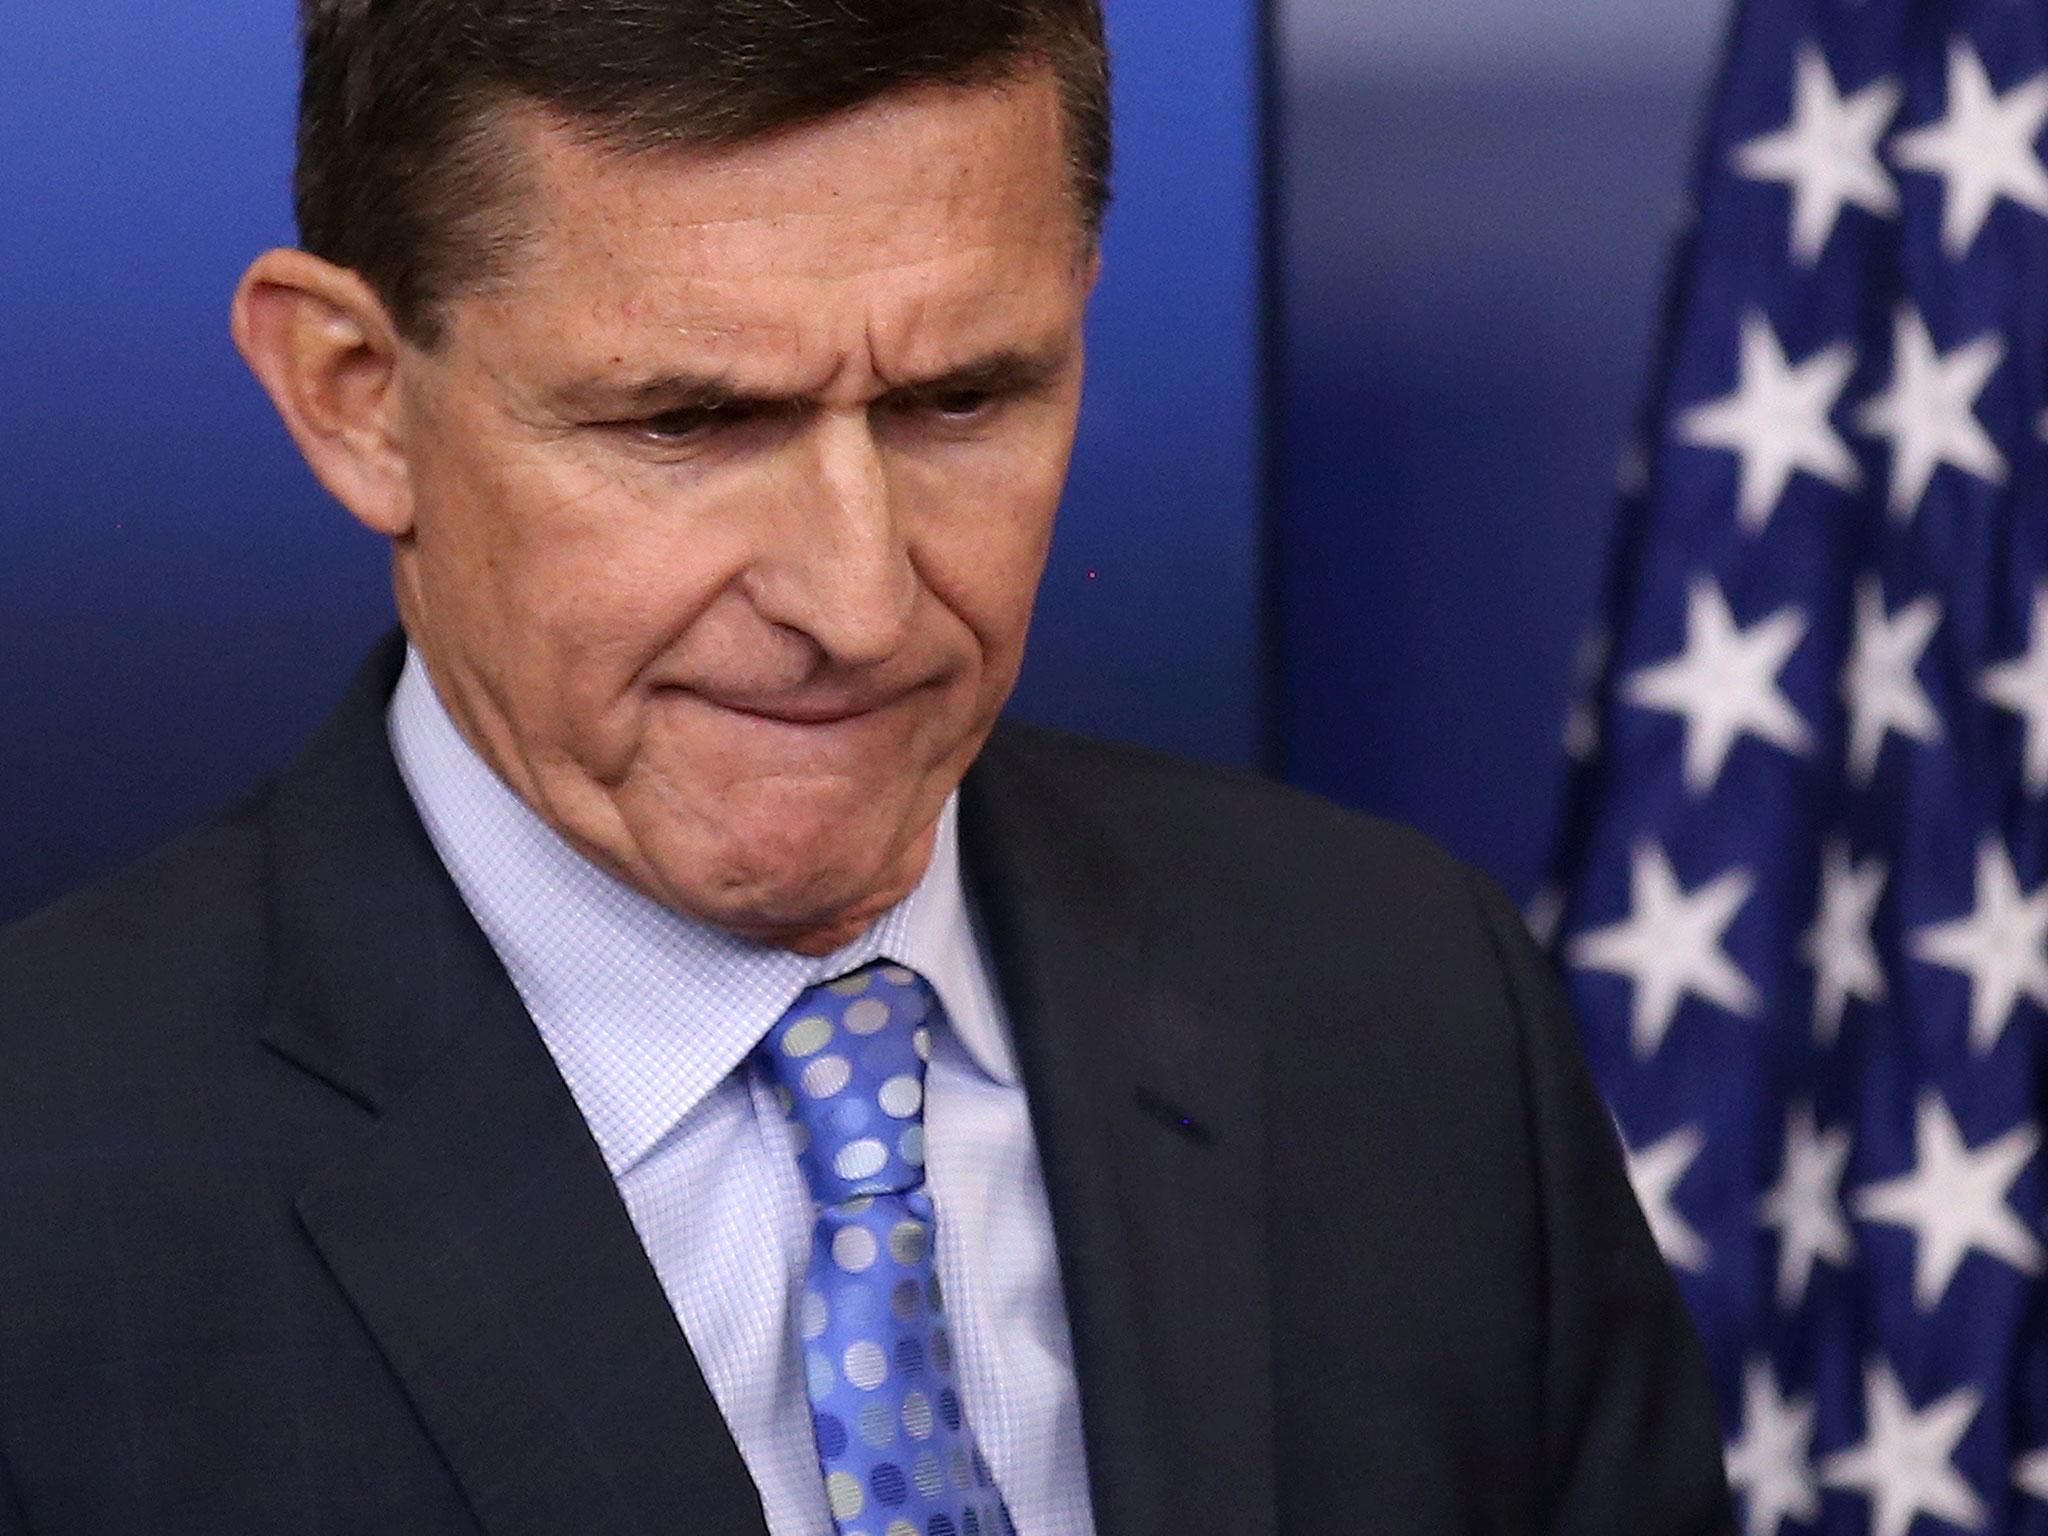 Lieutenant General Michael Flynn resigned as national security adviser after just three weeks